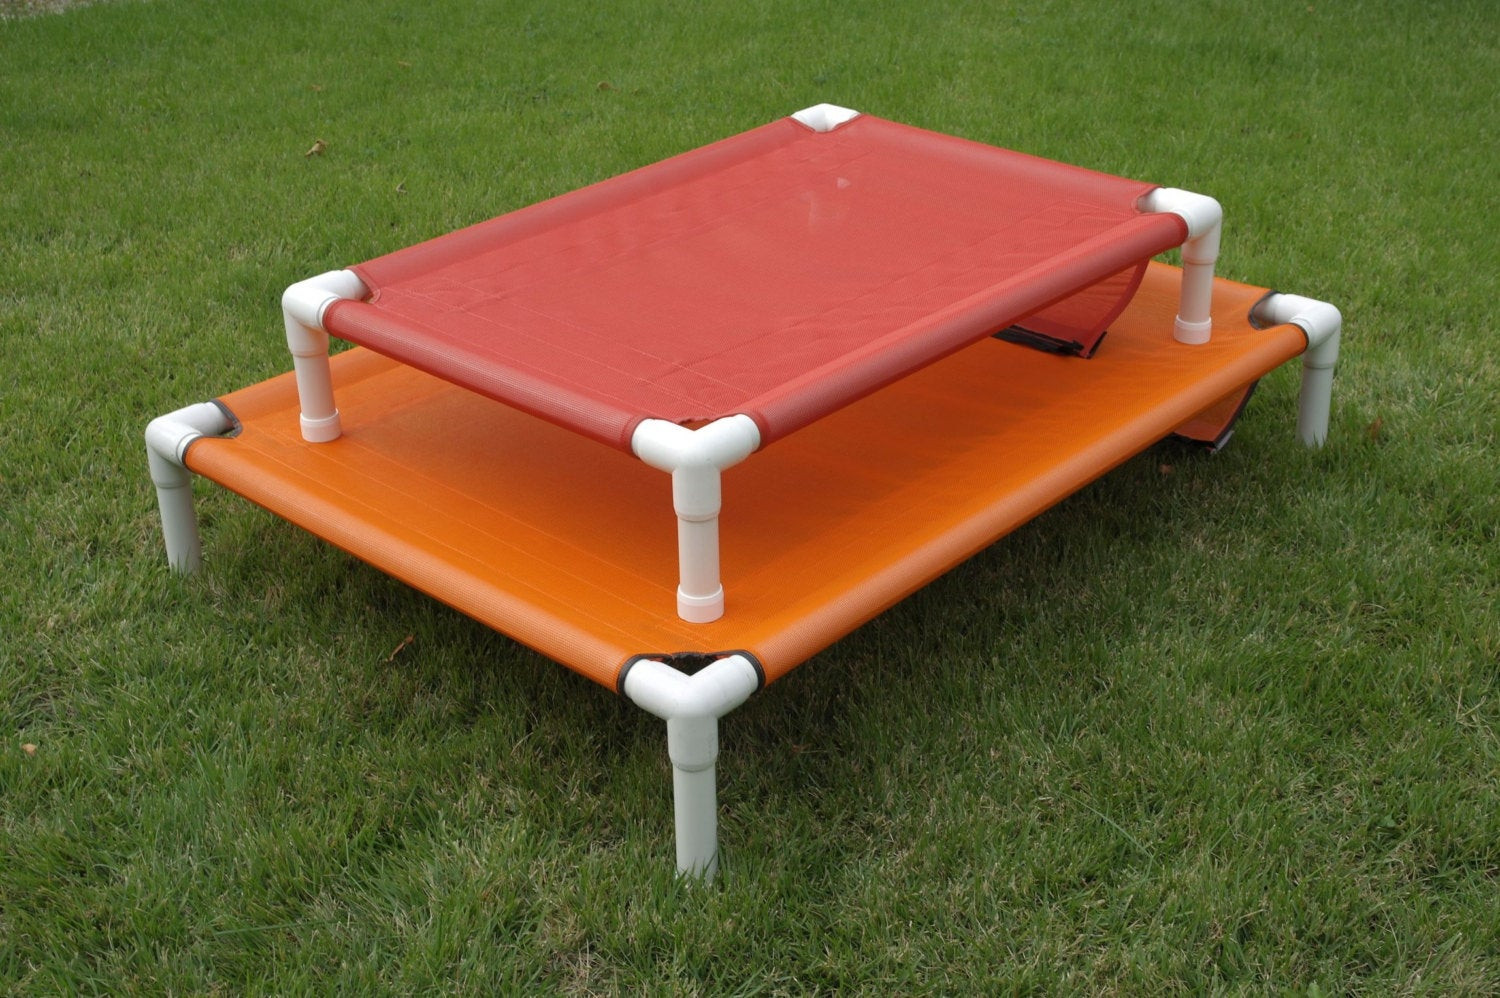 DIY Pvc Dog Bed
 Orthopedic Dog Bed PVC Outdoor Beds Mesh Dog Bed Cot Crate